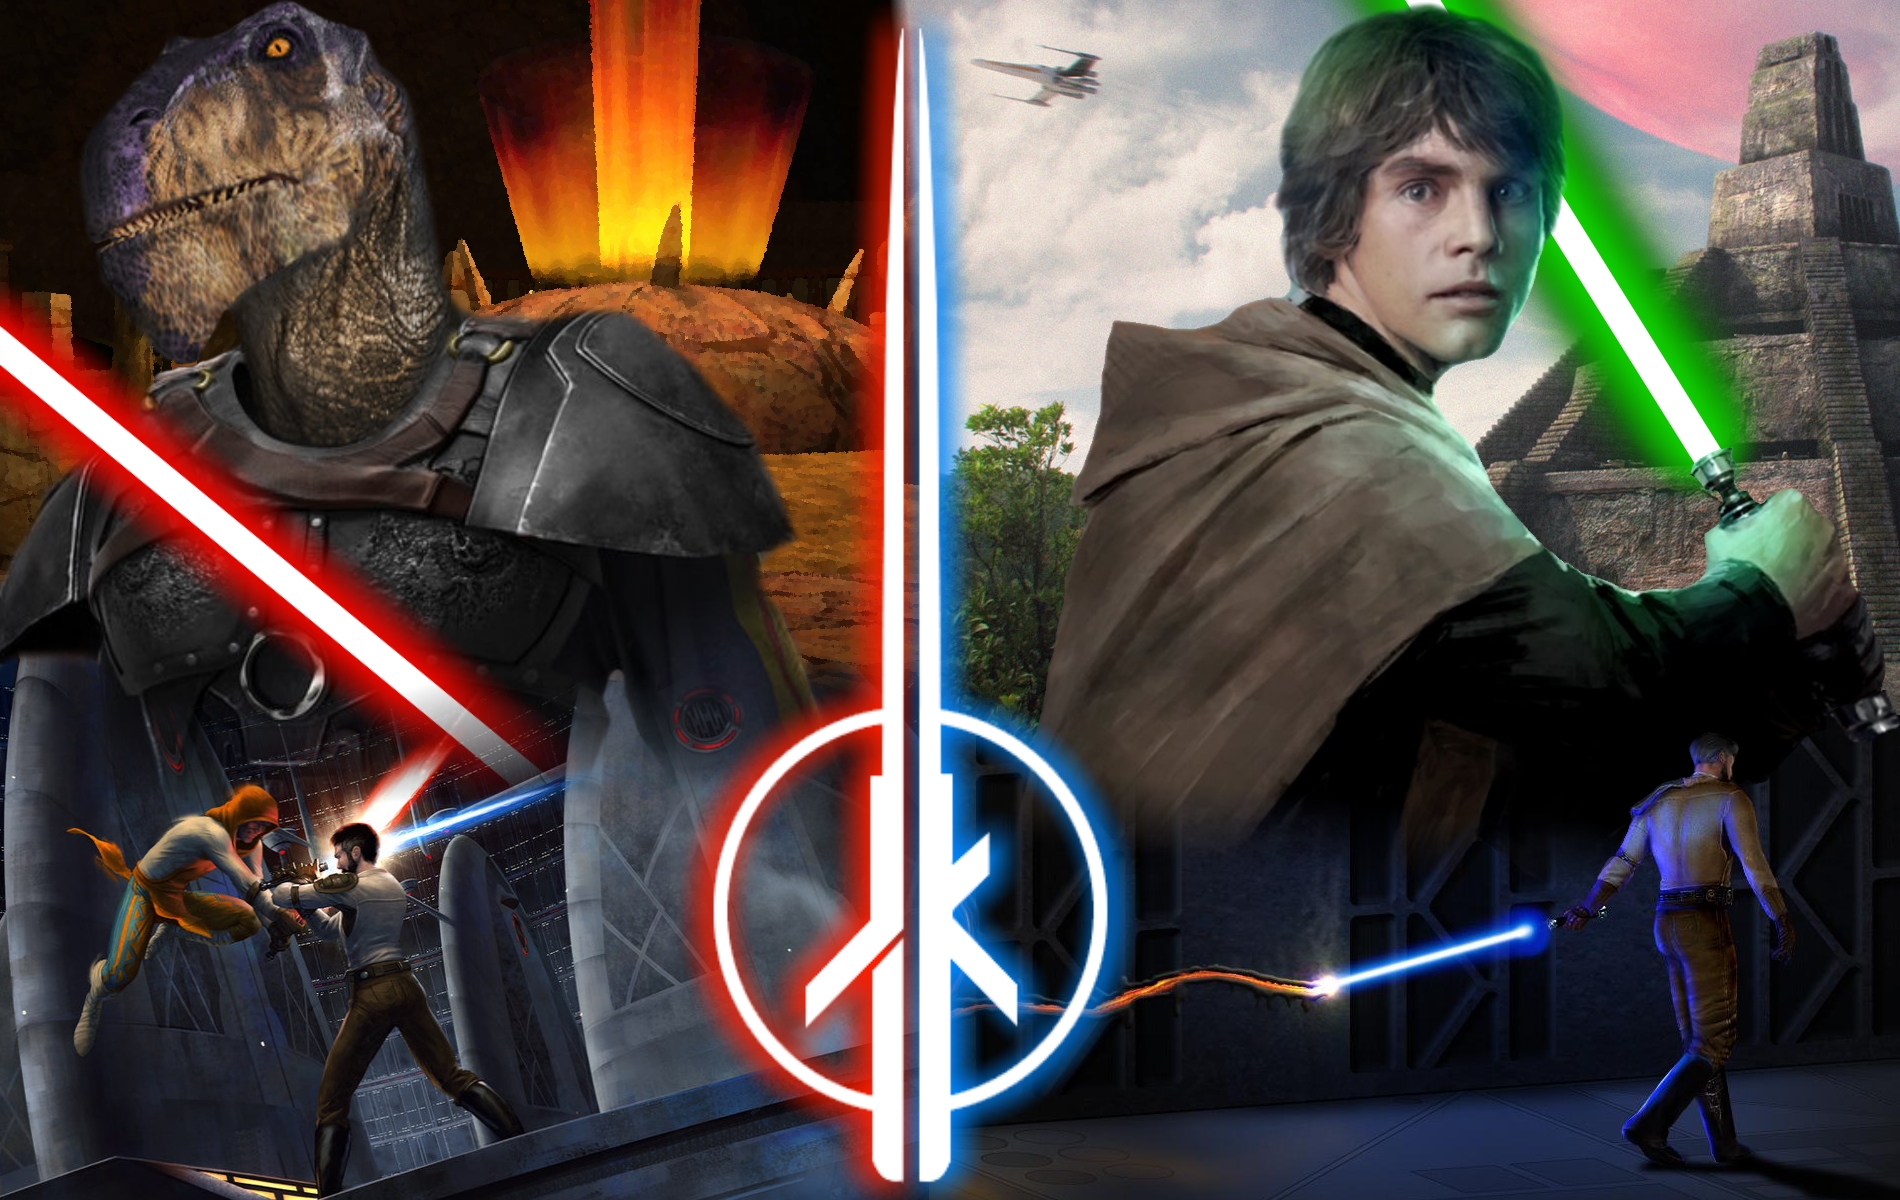 More information about "Jedi Knight Wallpaper"